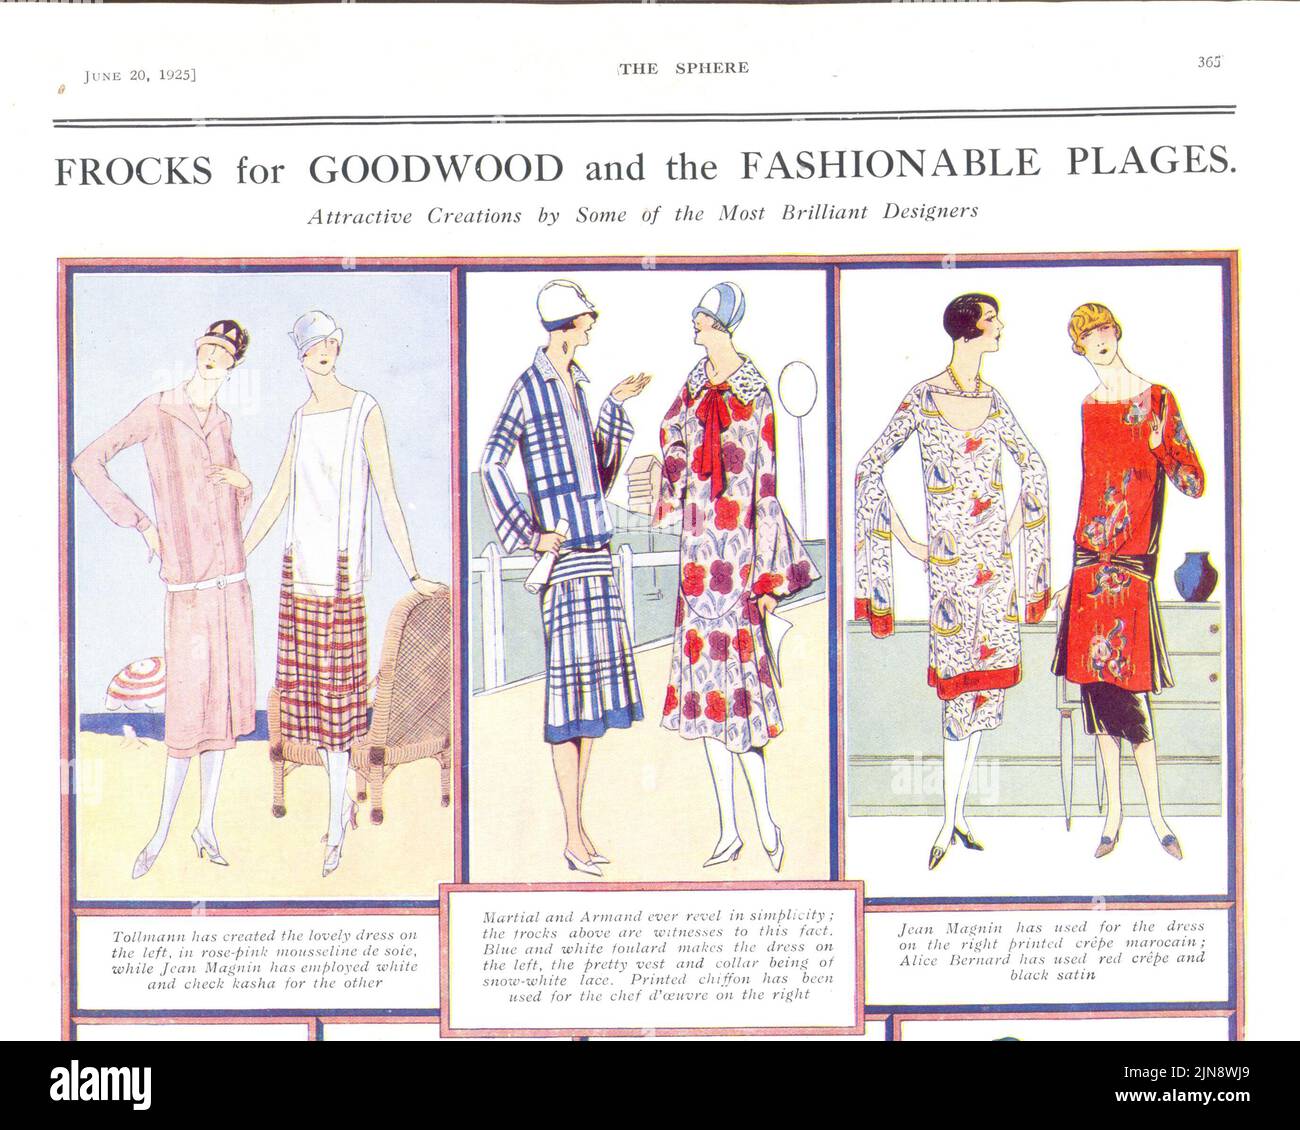 Frocks for Goodwood and the Fashionable Places Creations by Some of the Most Brilliant Designers from The Sphere 20 June 1925 Stock Photo